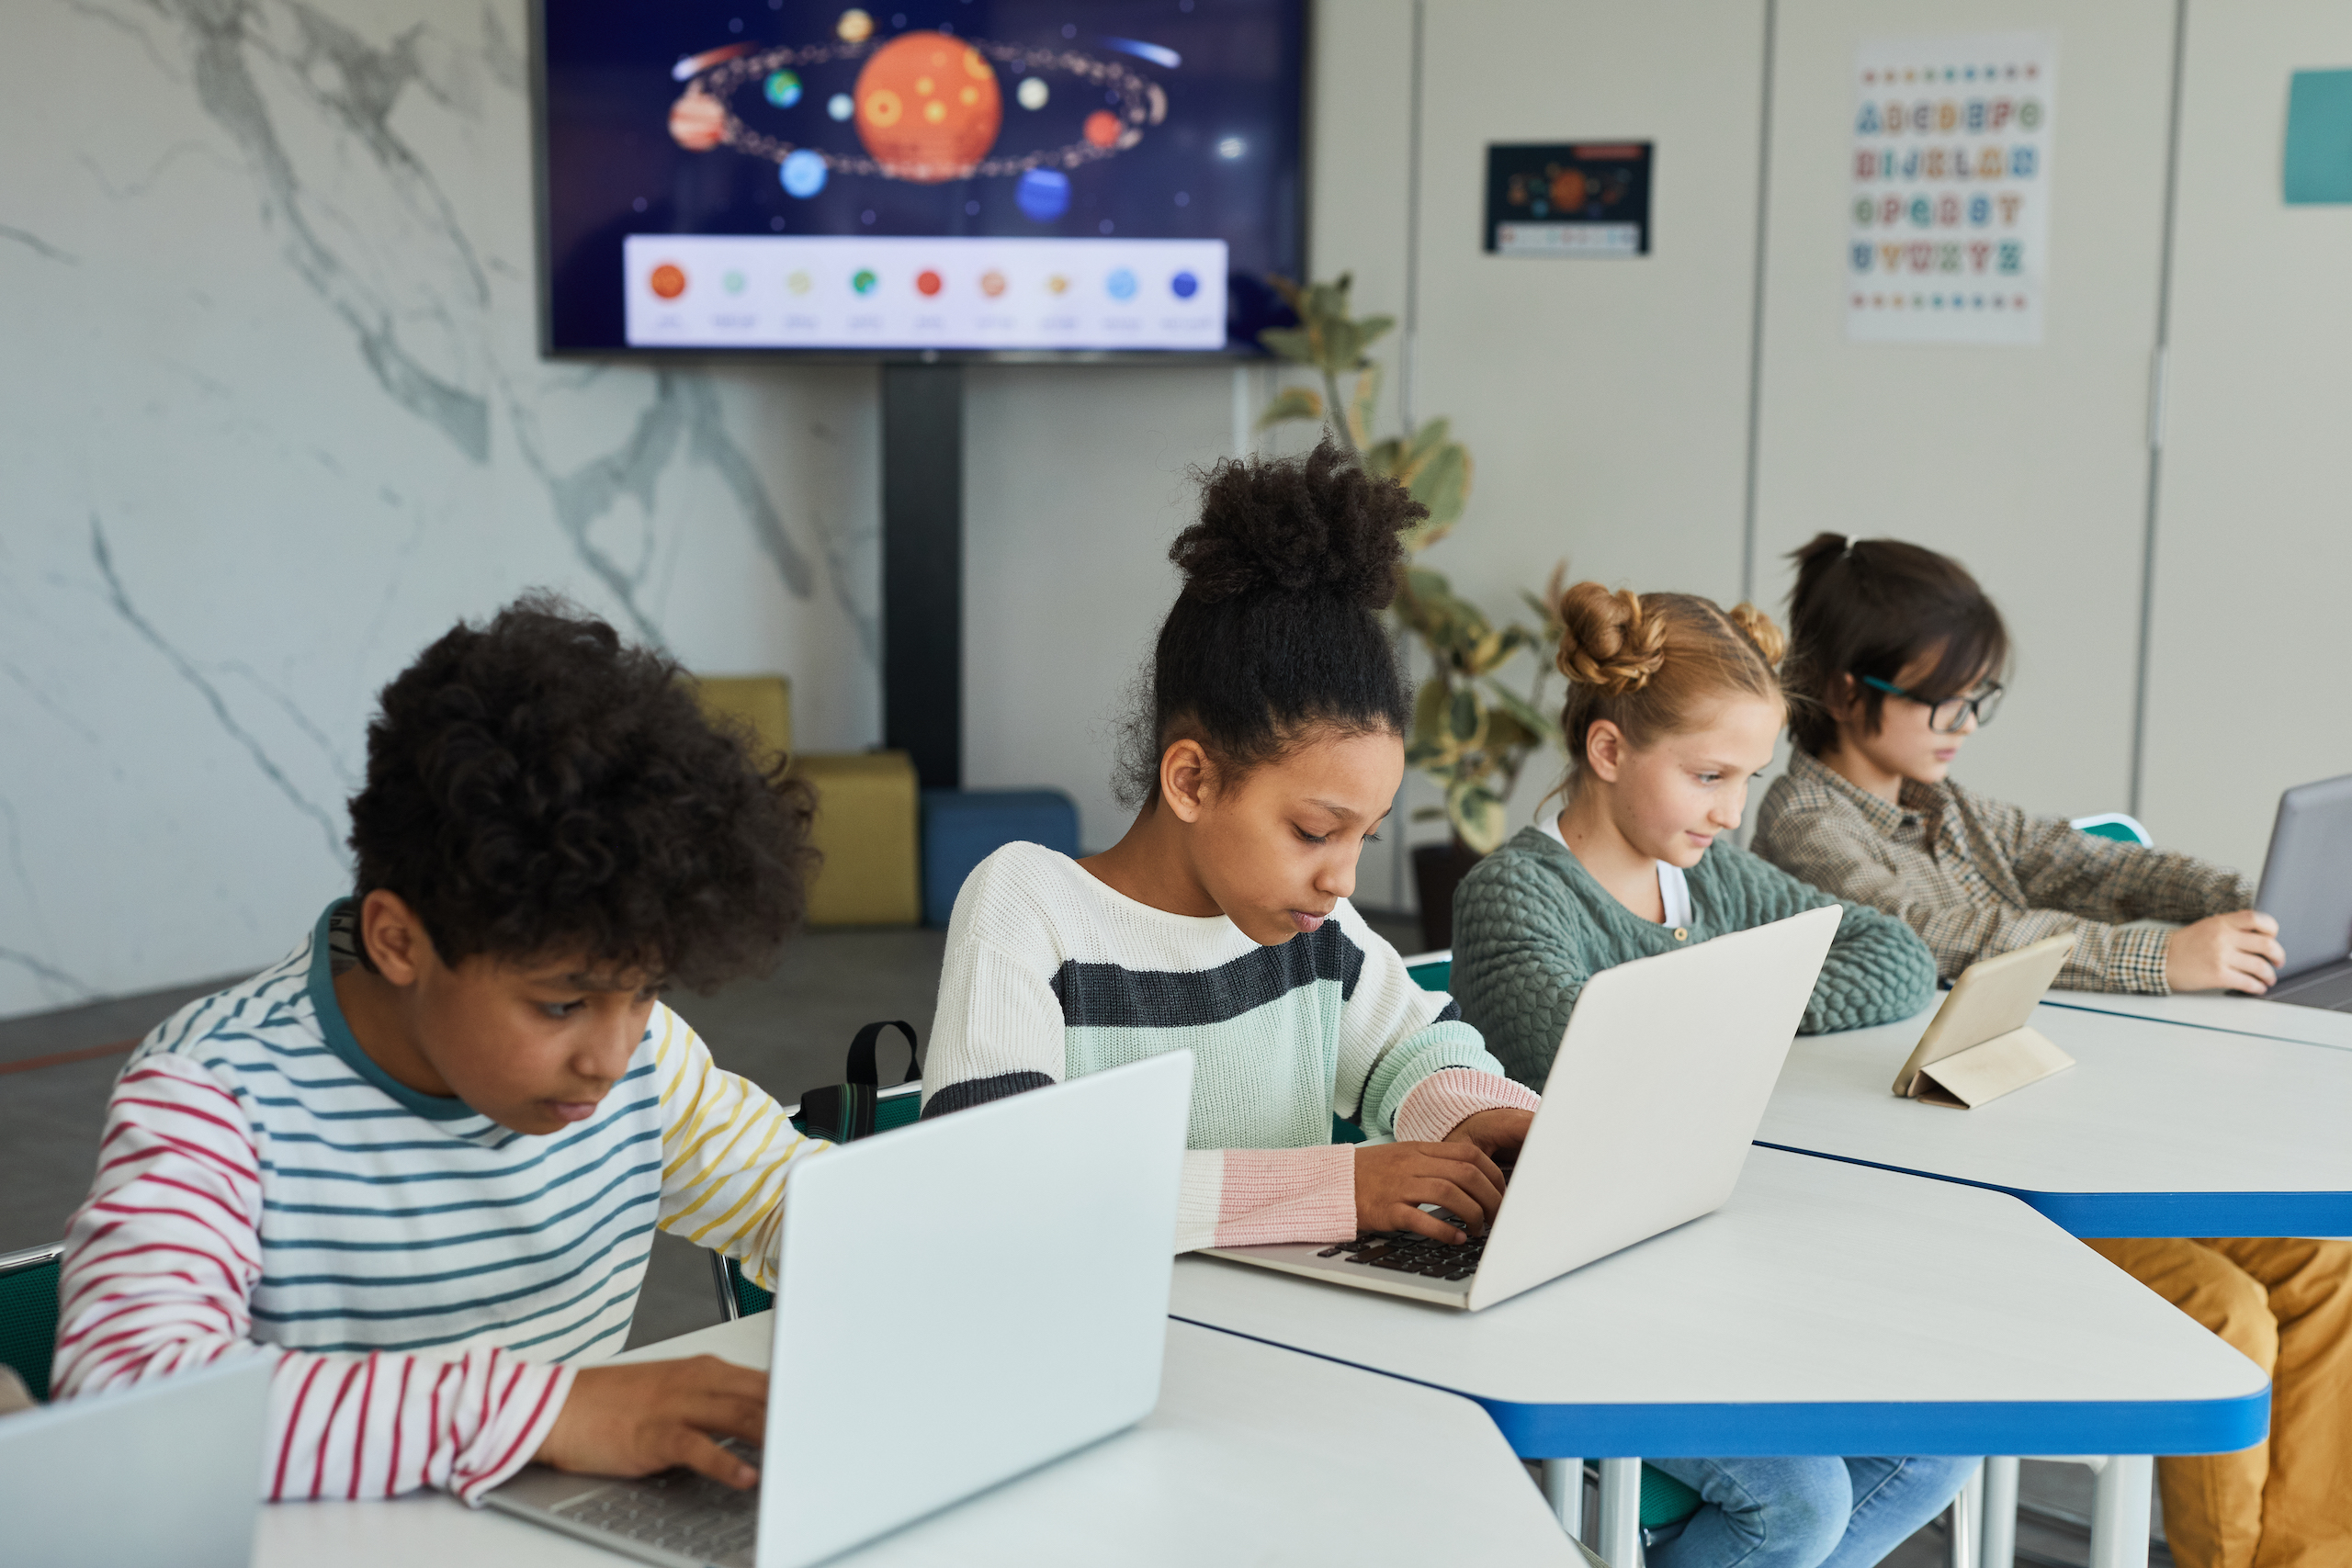 Diverse group of children sitting in row at school classroom and using laptops and computer adaptive assessment tools.